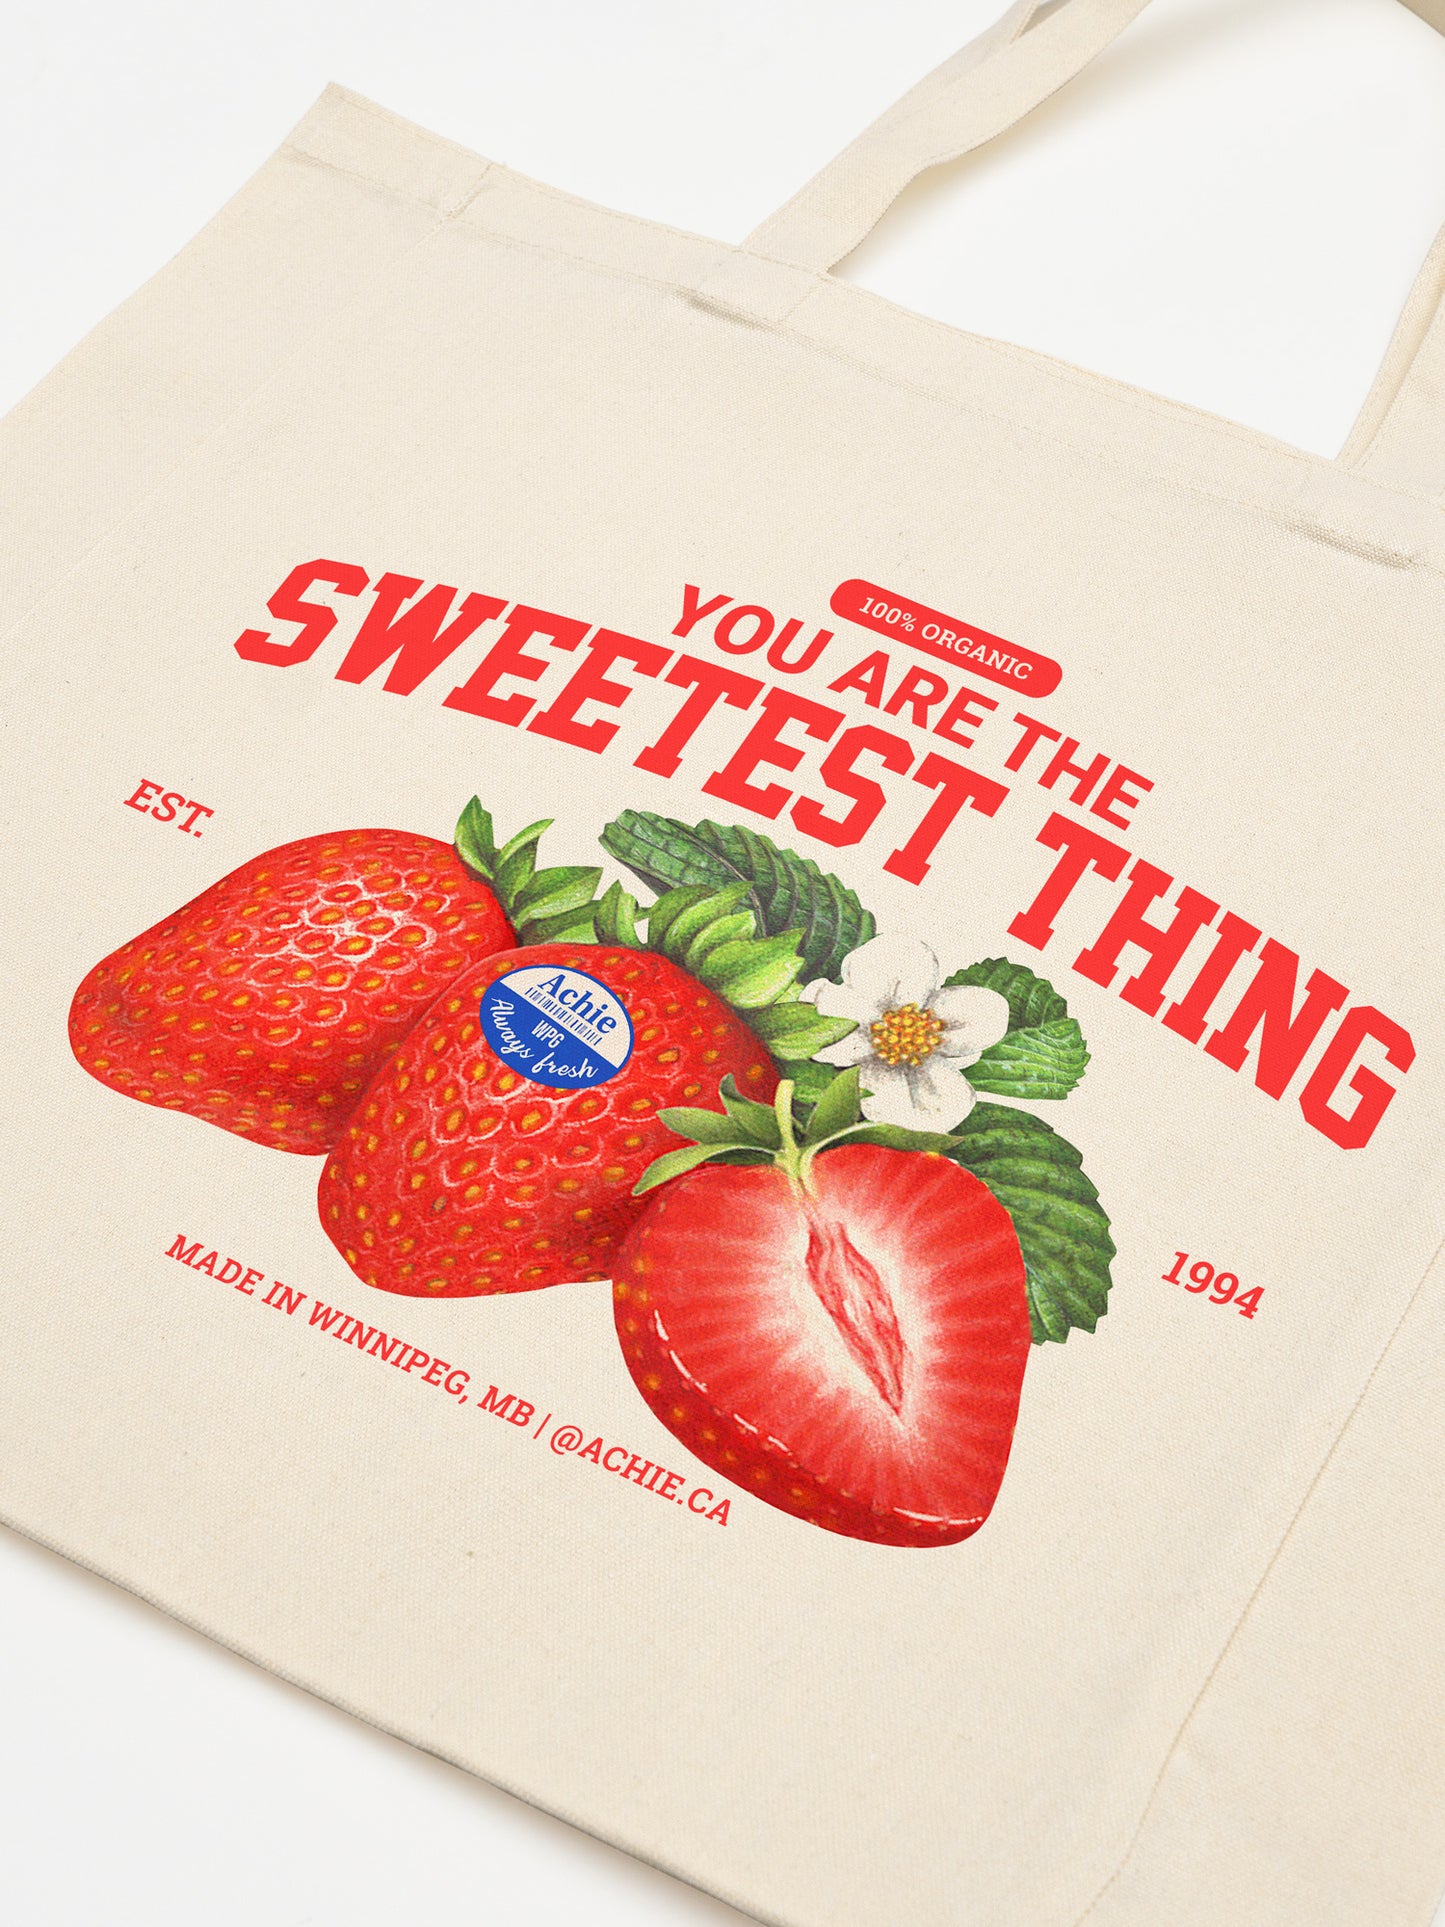 You Are The Sweetest Thing Tote Bag